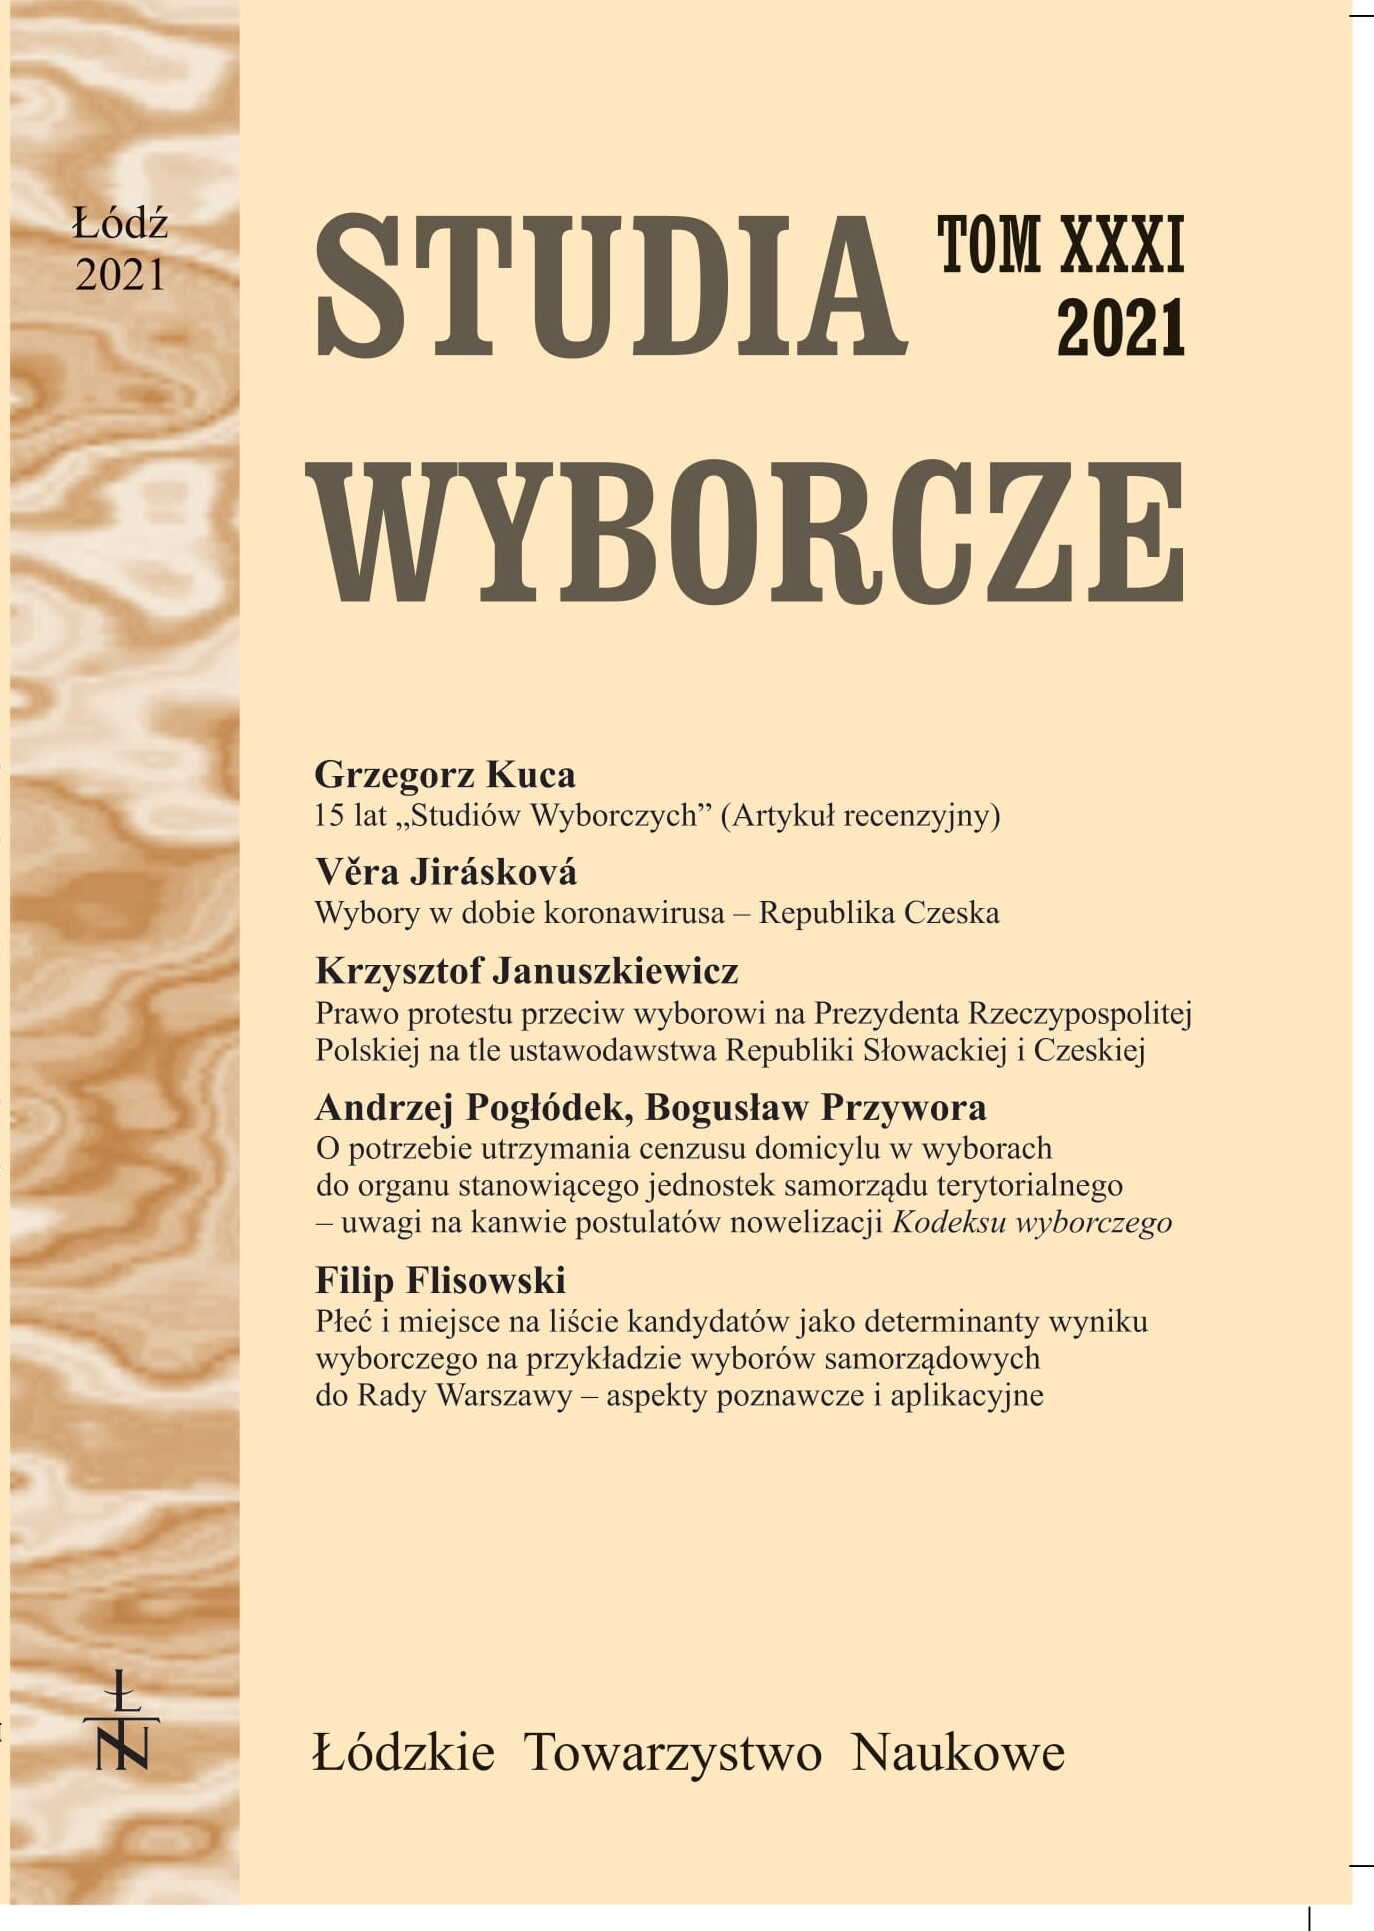 The Right to Protest Against the Election of the President of the Republic of Poland Against the Background of the Legislation of the Slovak and Czech Republics Cover Image